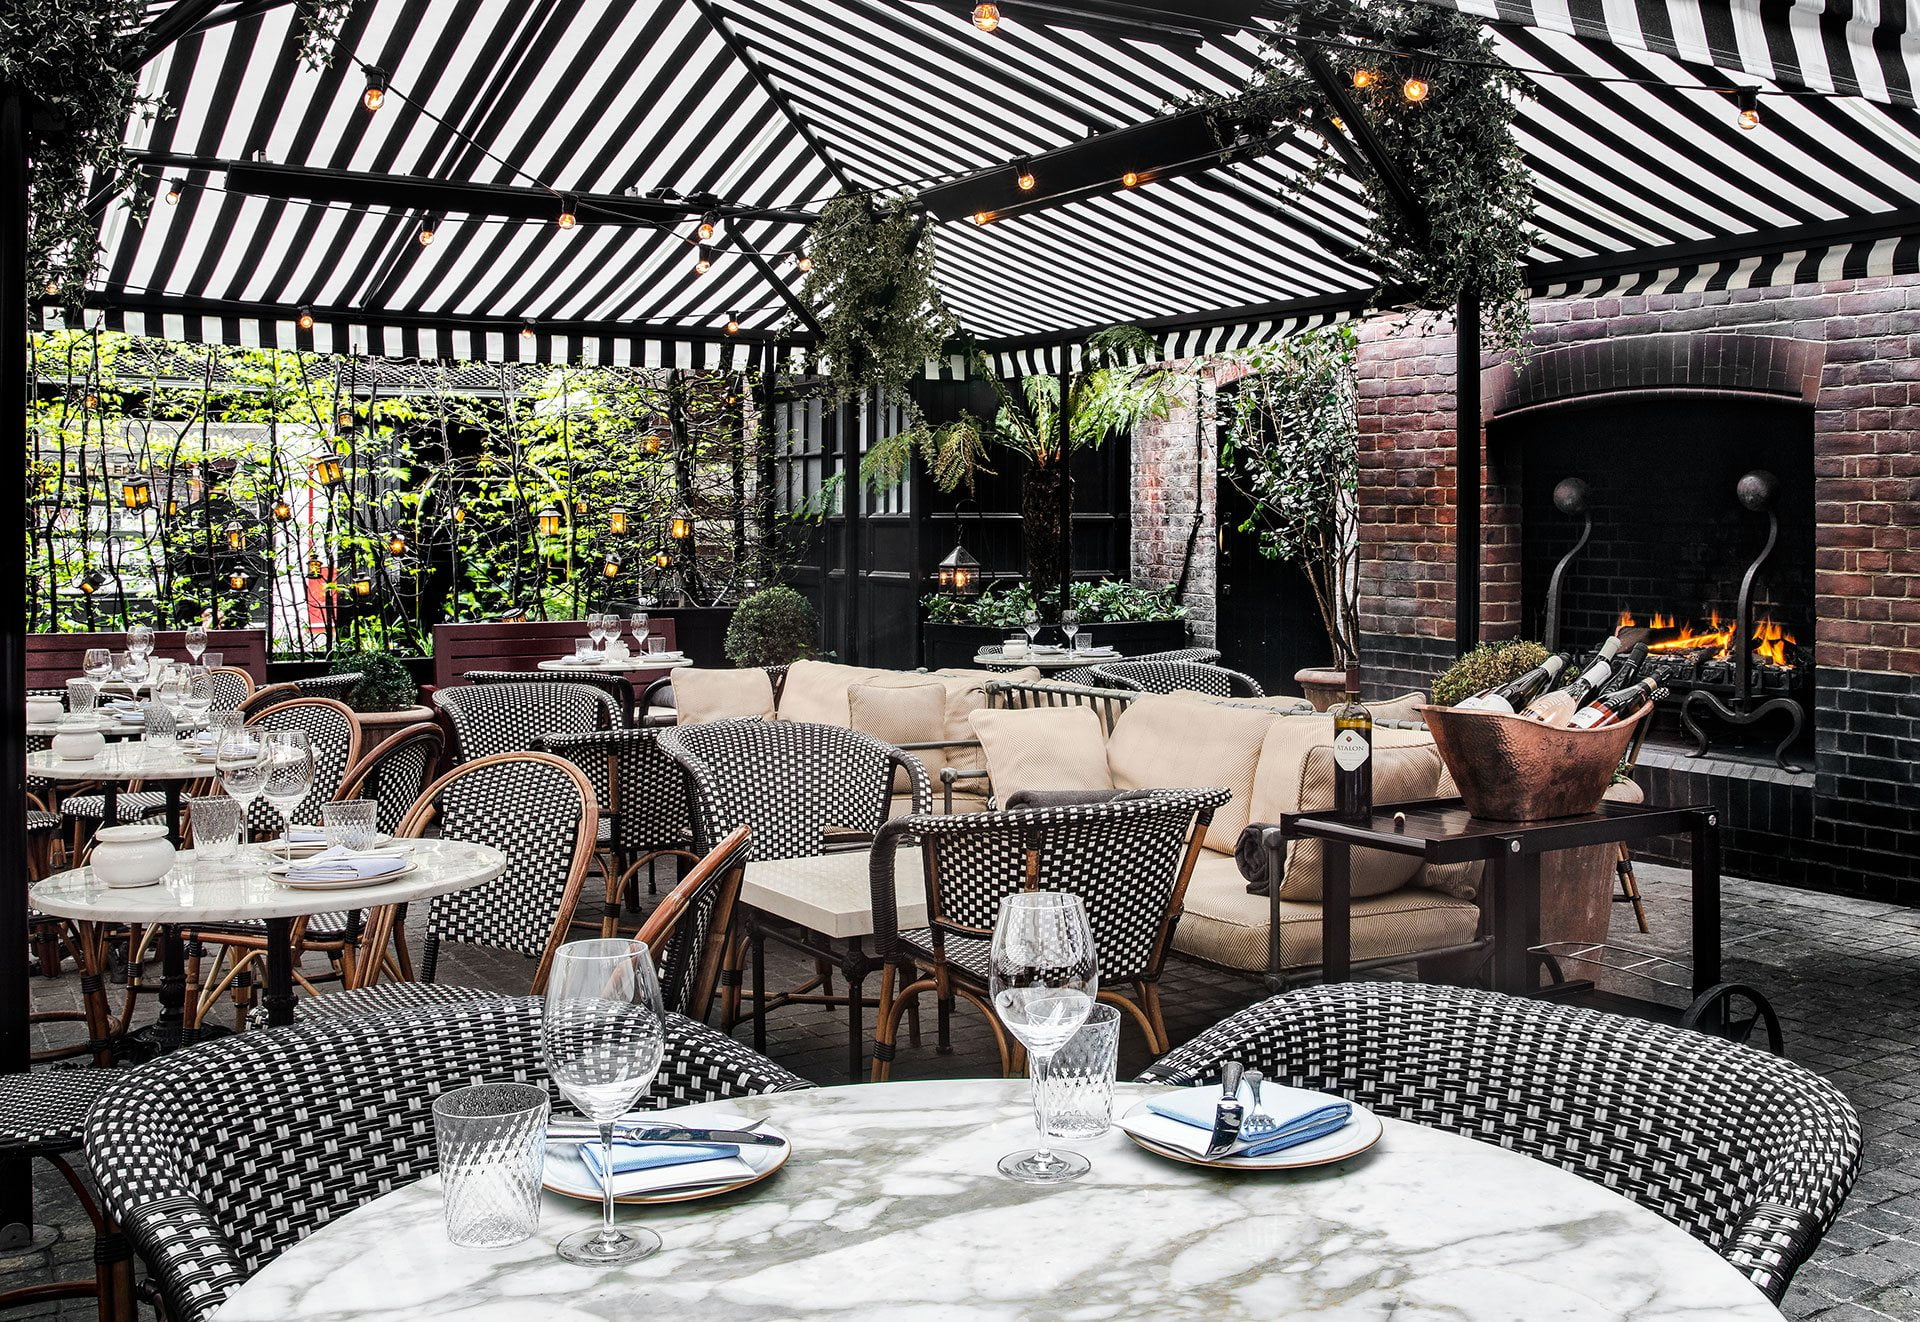 chiltern firehouse outdoor dining